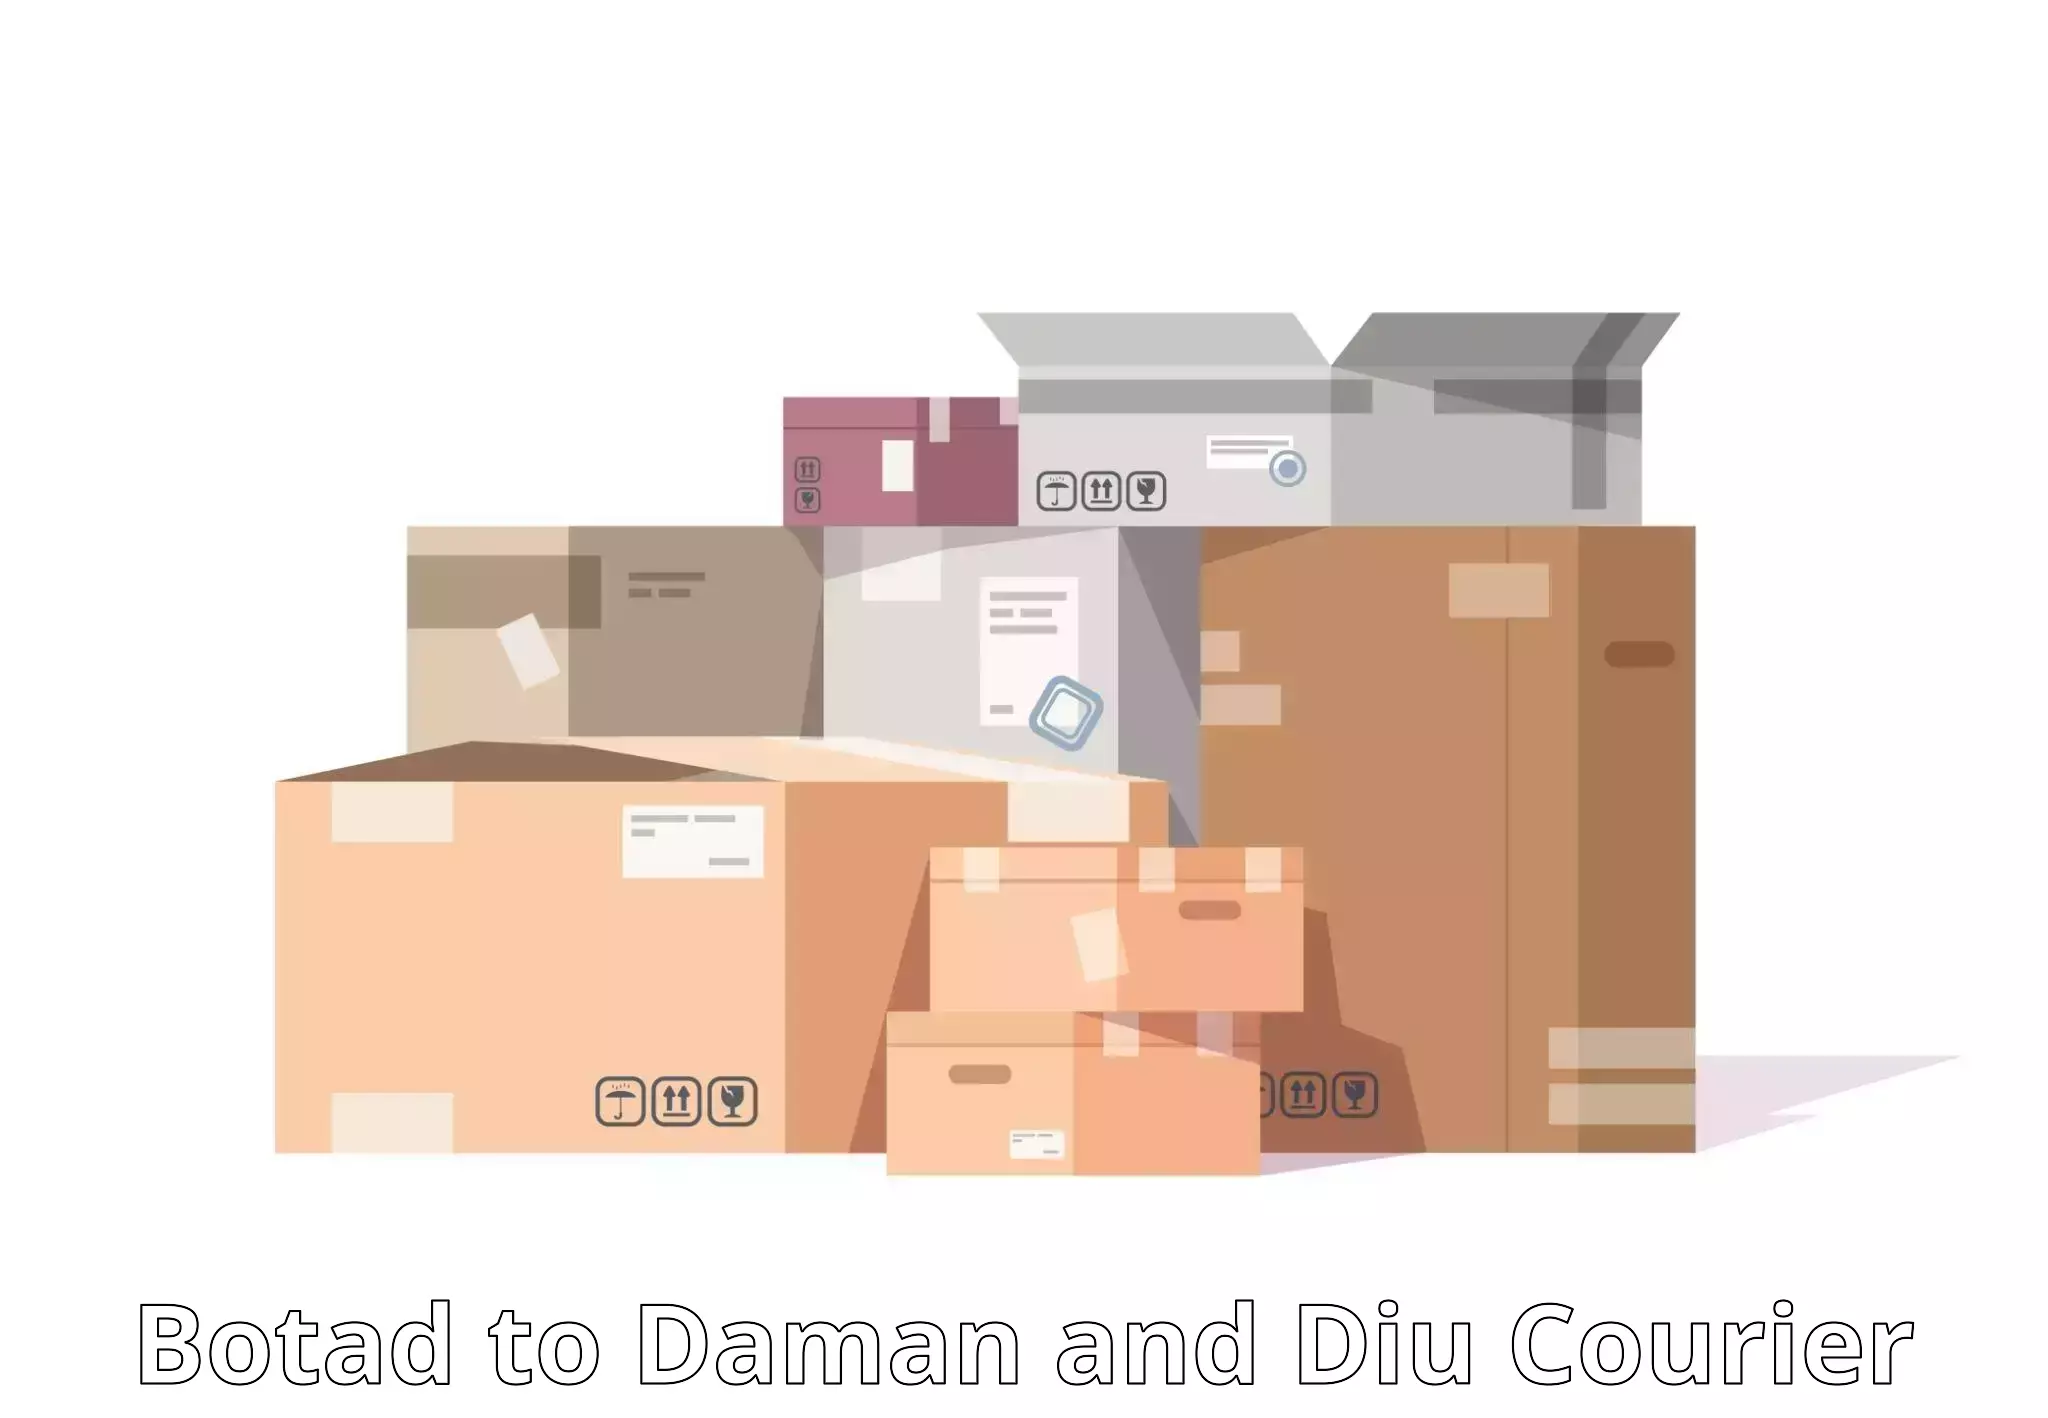 Full-service courier options Botad to Daman and Diu